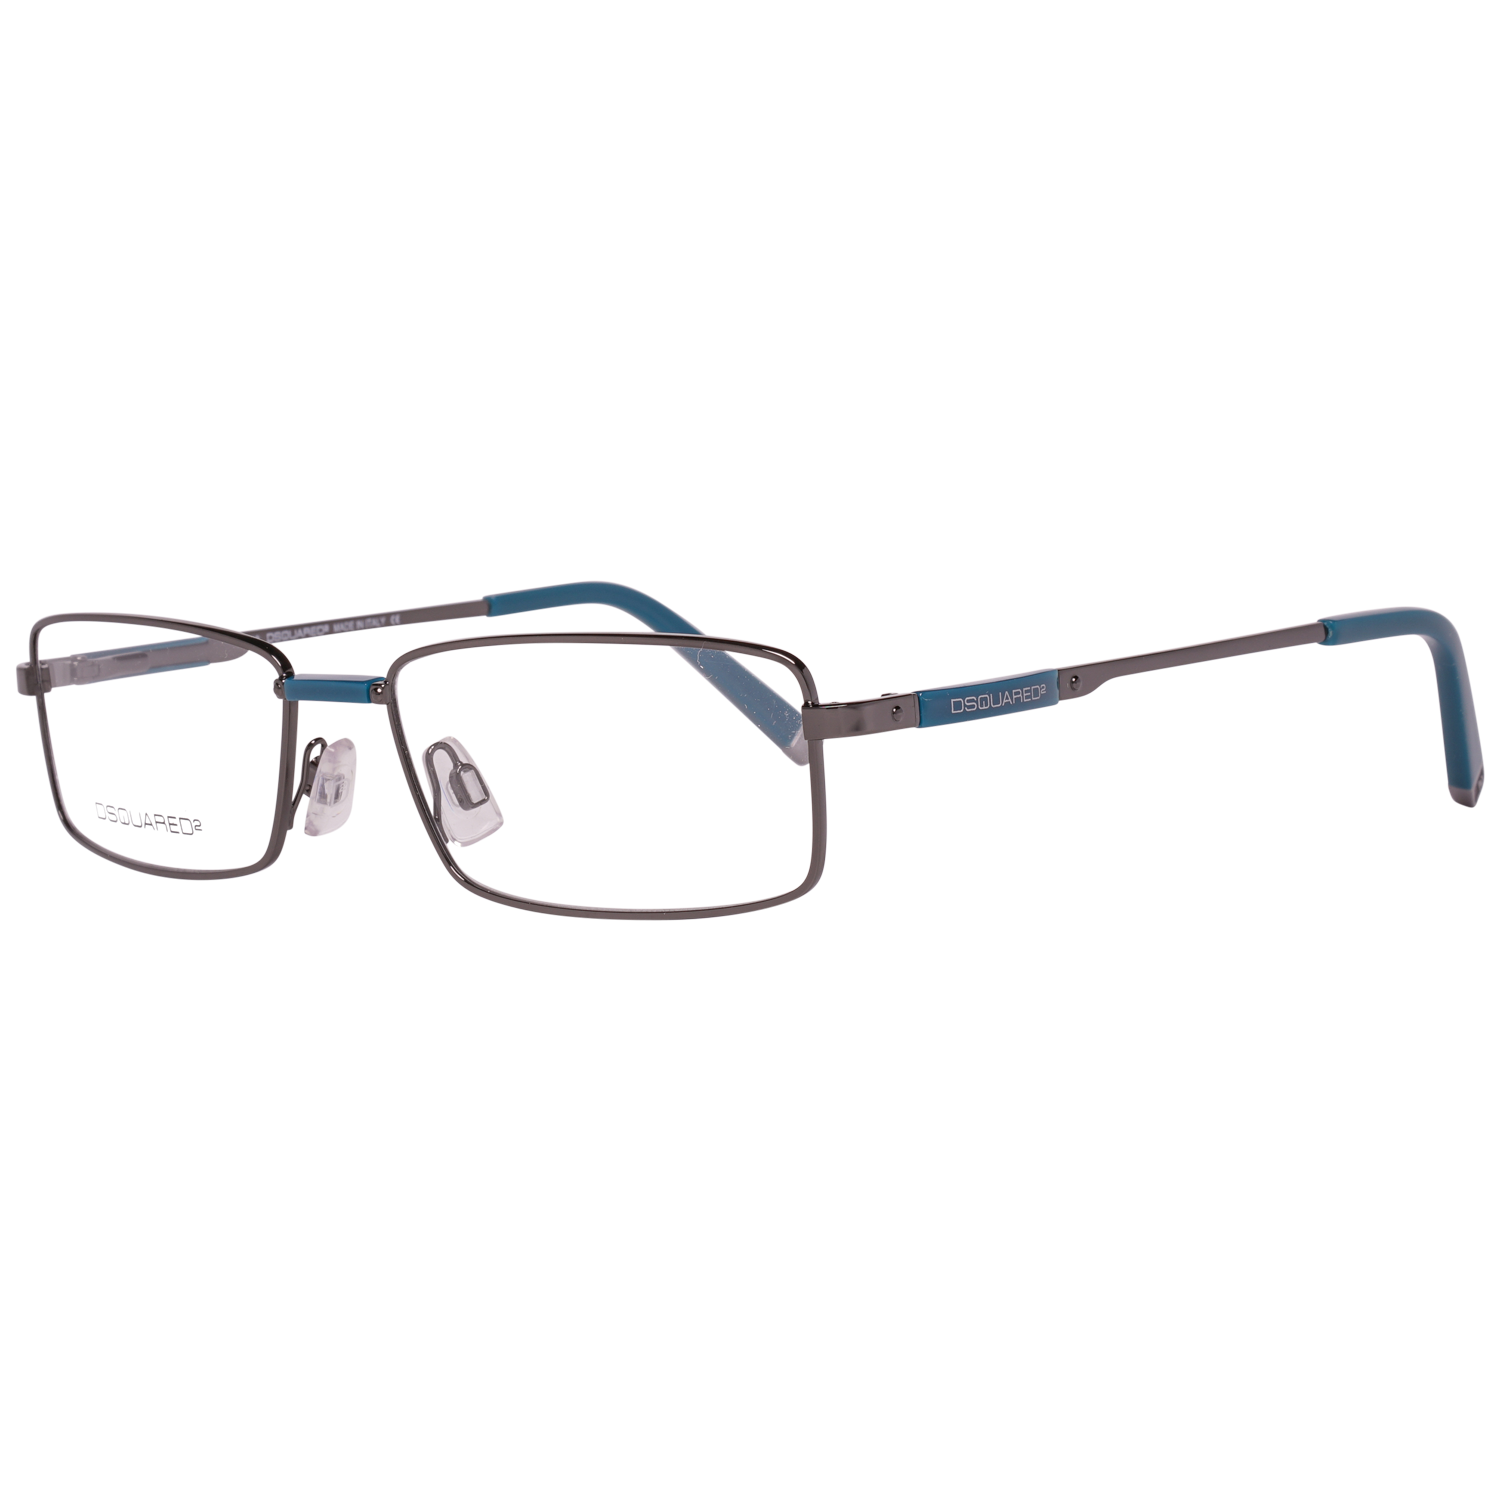 Dsquared2 Optical Frame DQ5014 008 53